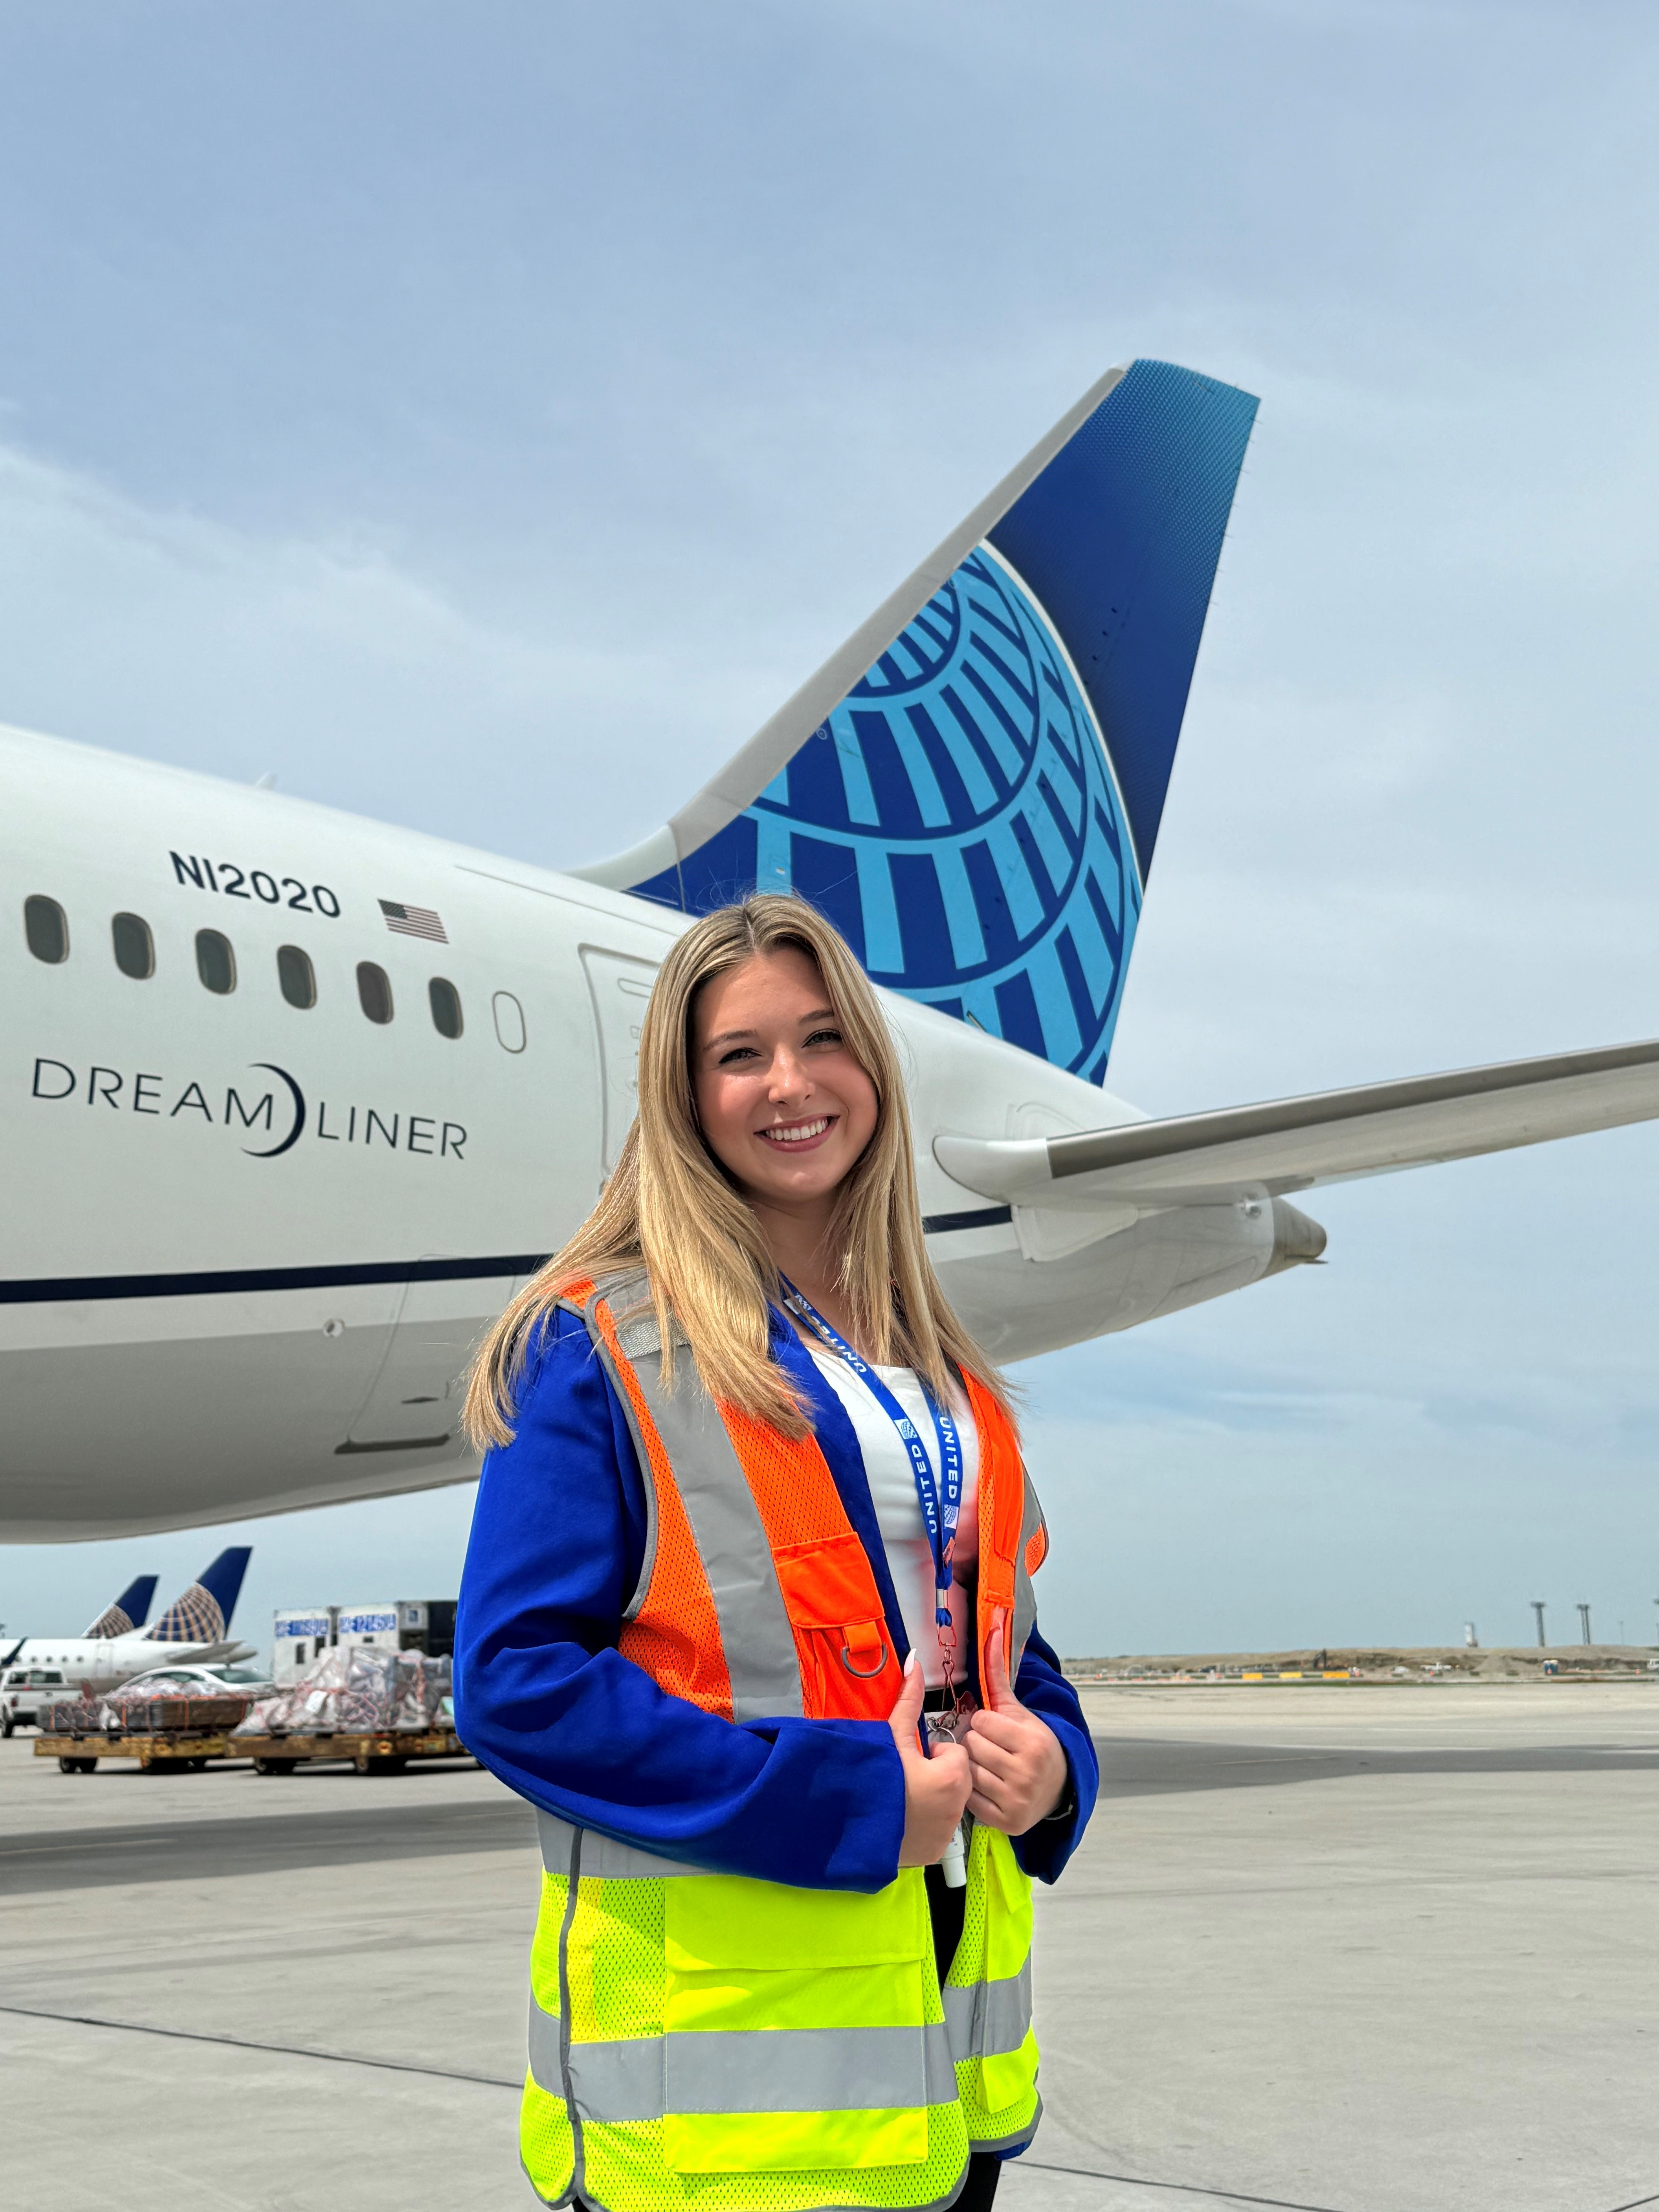 Bri Zahn poses for photo in front of United Airlines airplane